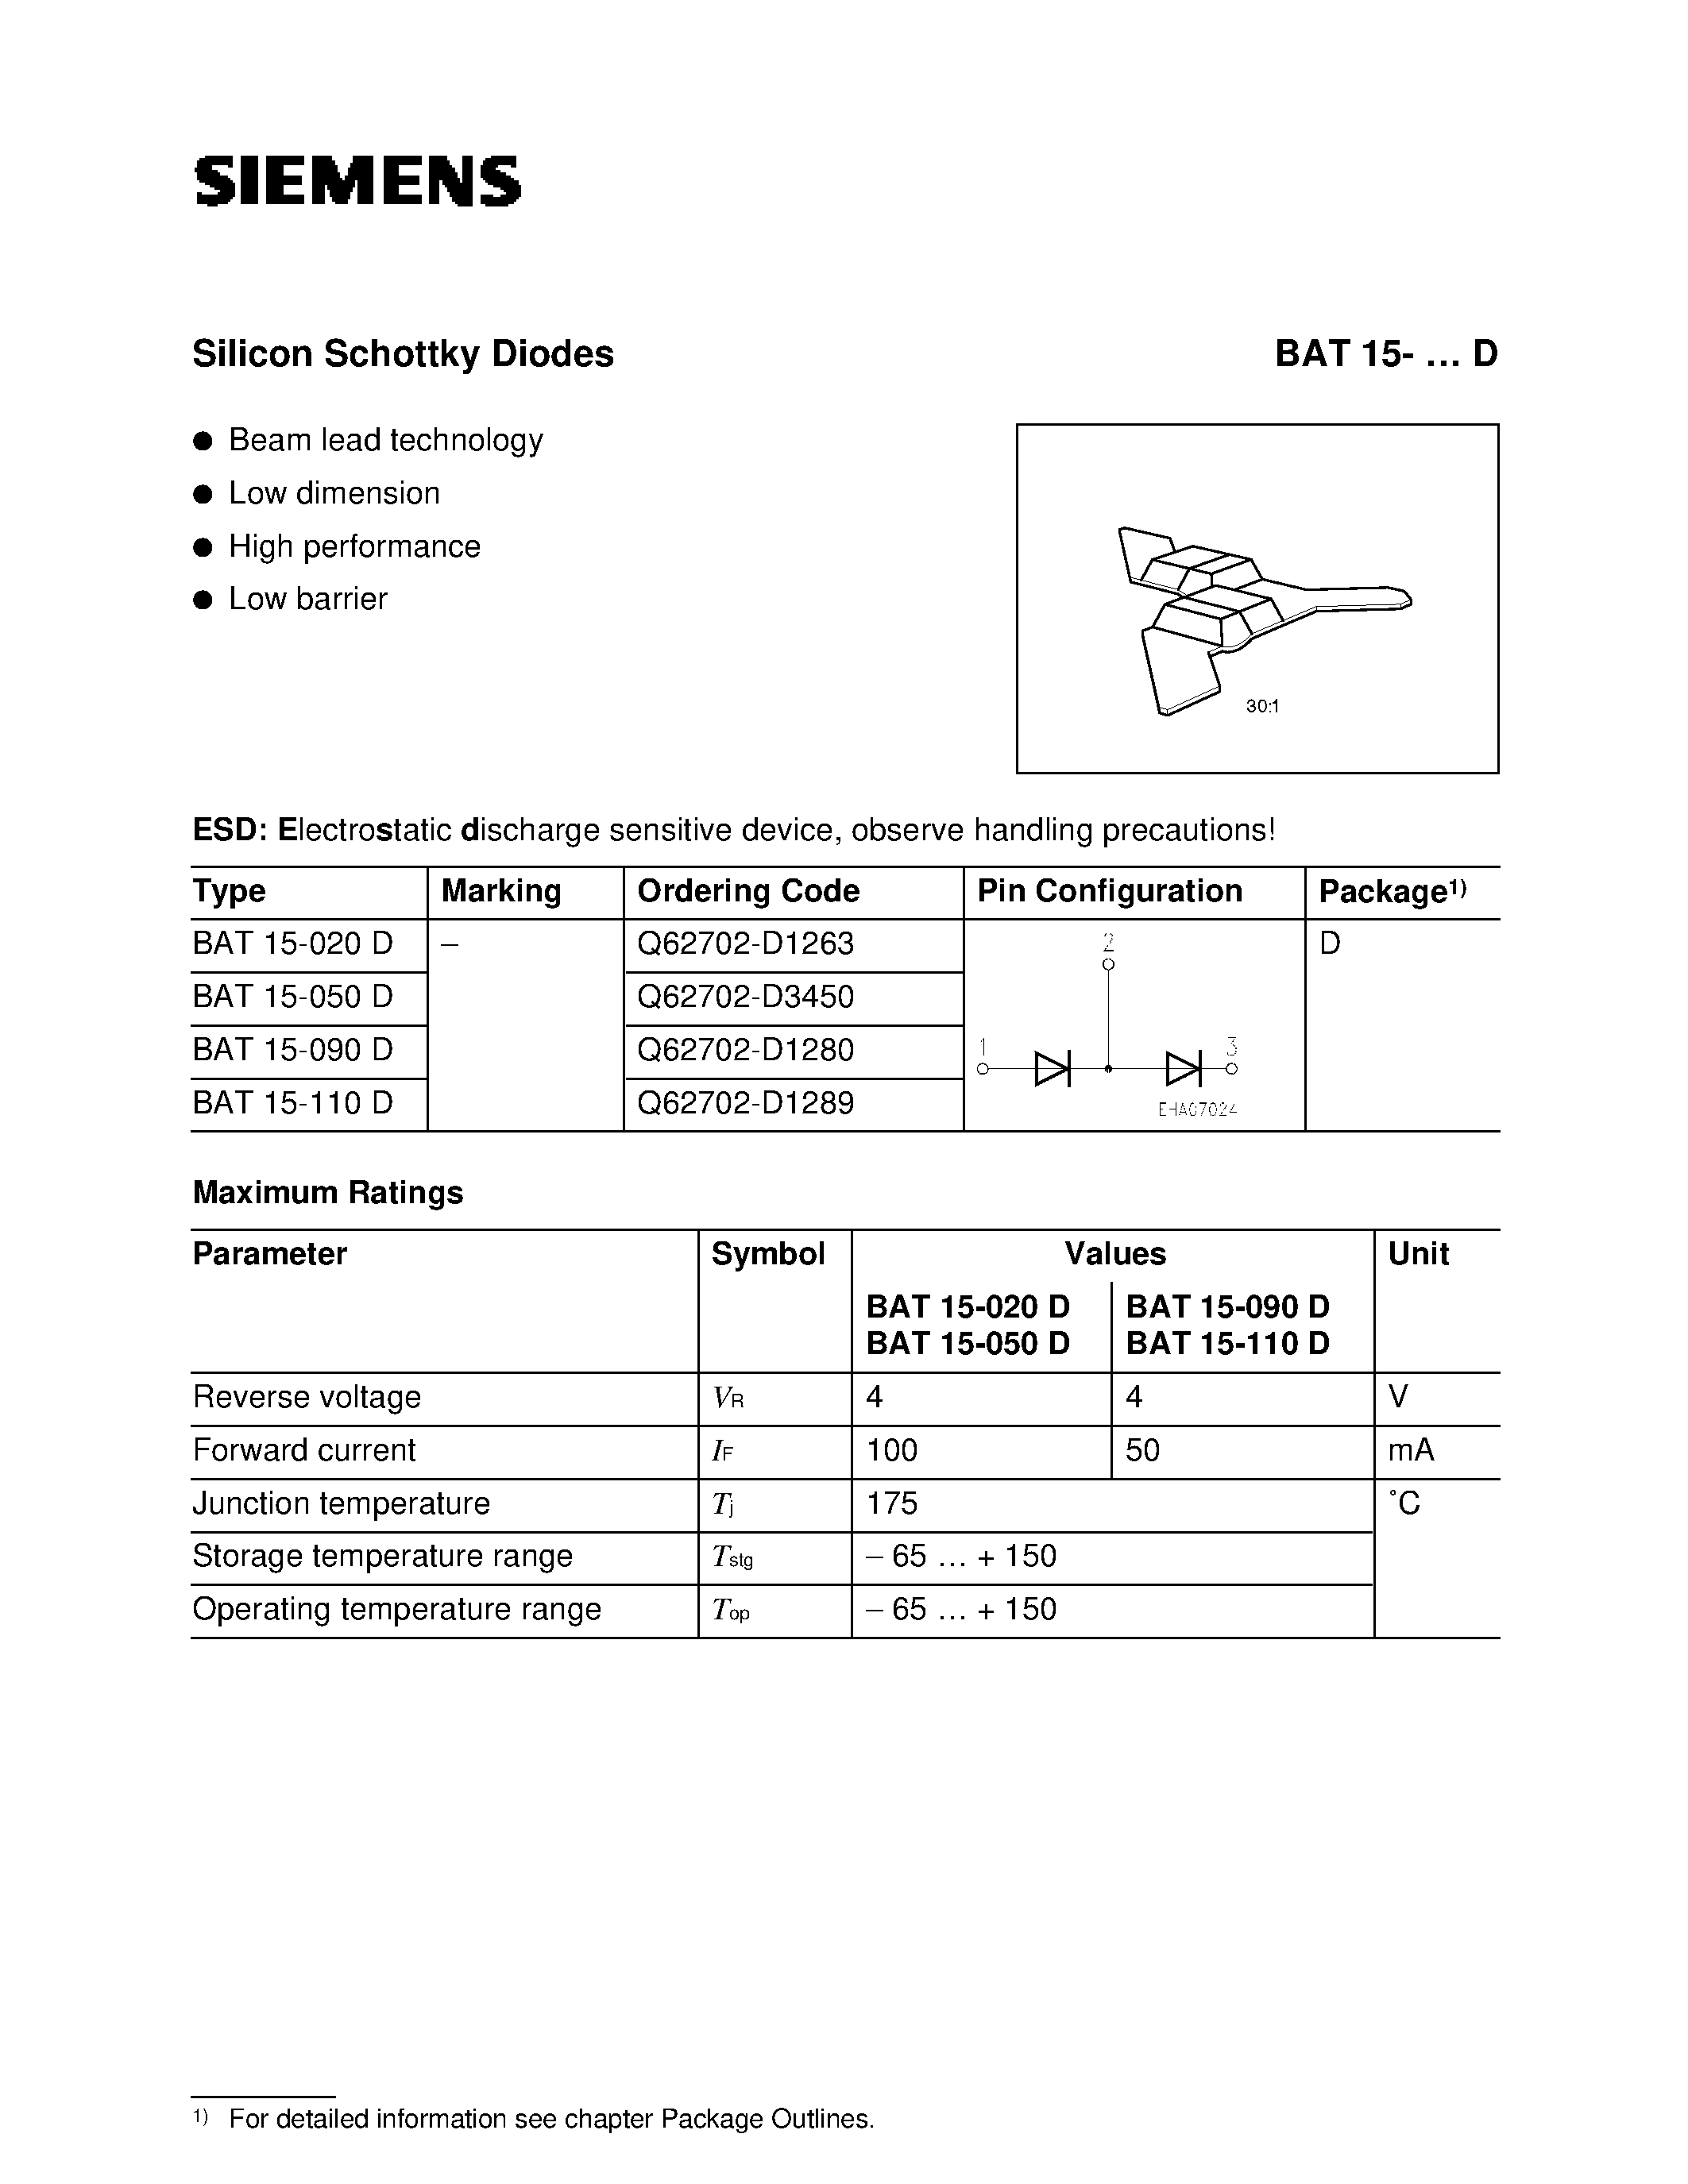 Datasheet BAT15-050D - Silicon Schottky Diodes (Beam lead technology Low dimension High performance Low barrier) page 1